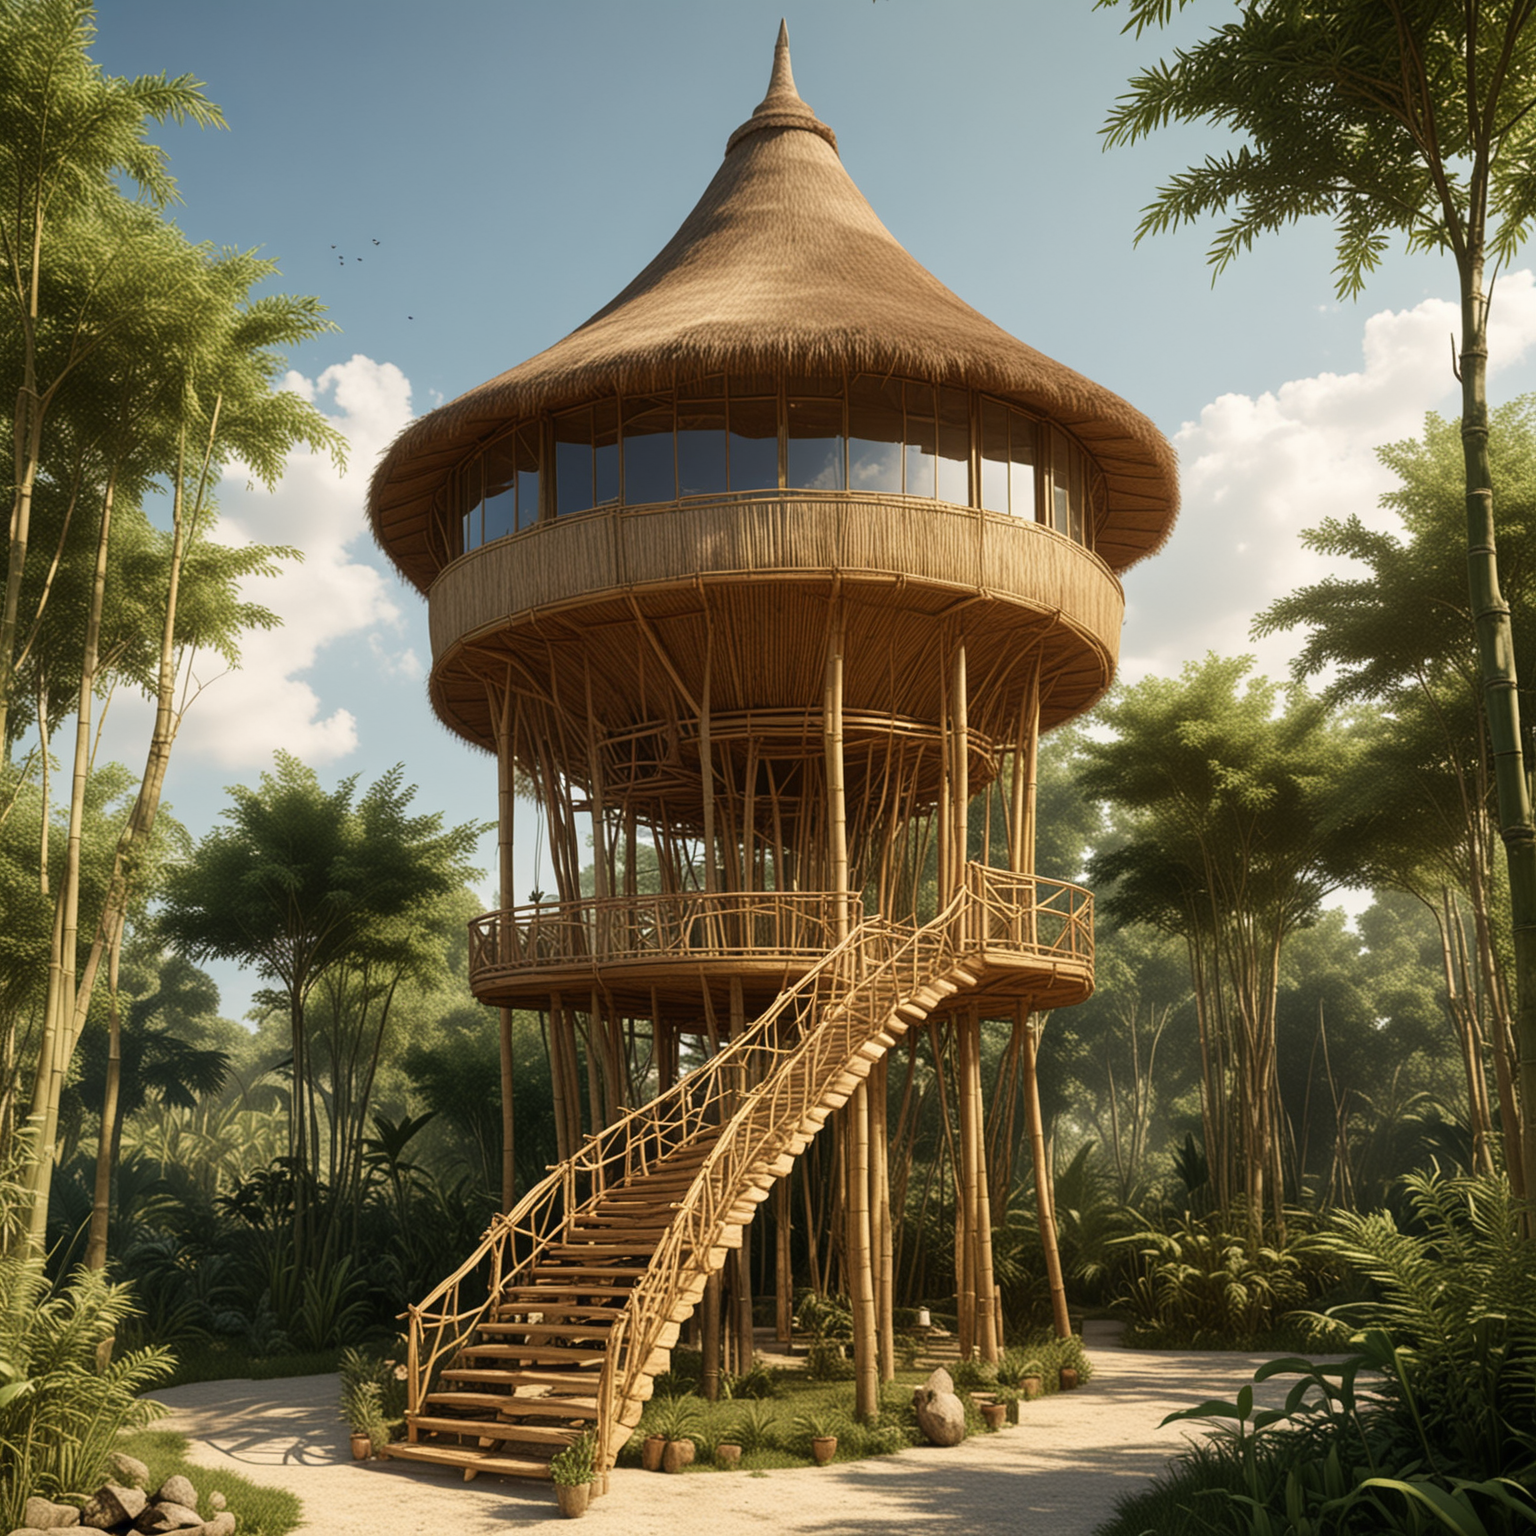 Elevated Bamboo Villa with Hyperbolic Tower and Organic Roof Design